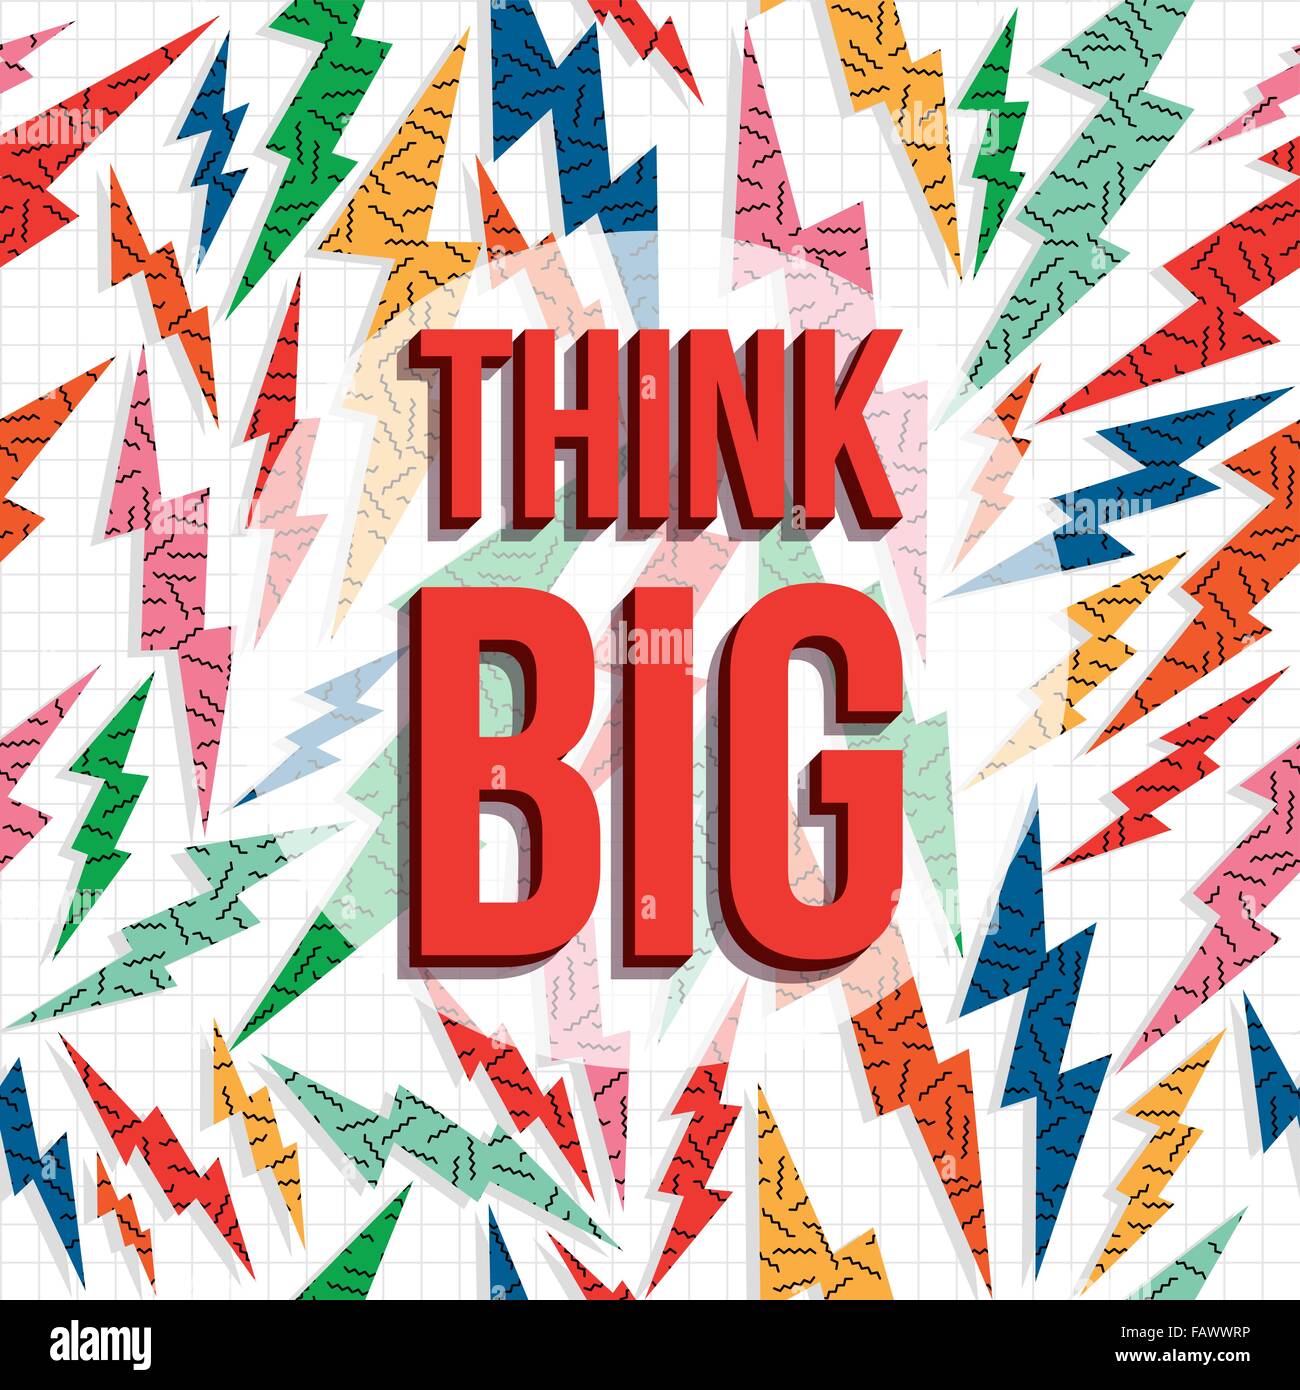 Think big inspiration quote, creative imagination motivation text with retro 80s background. EPS10 vector. Stock Vector